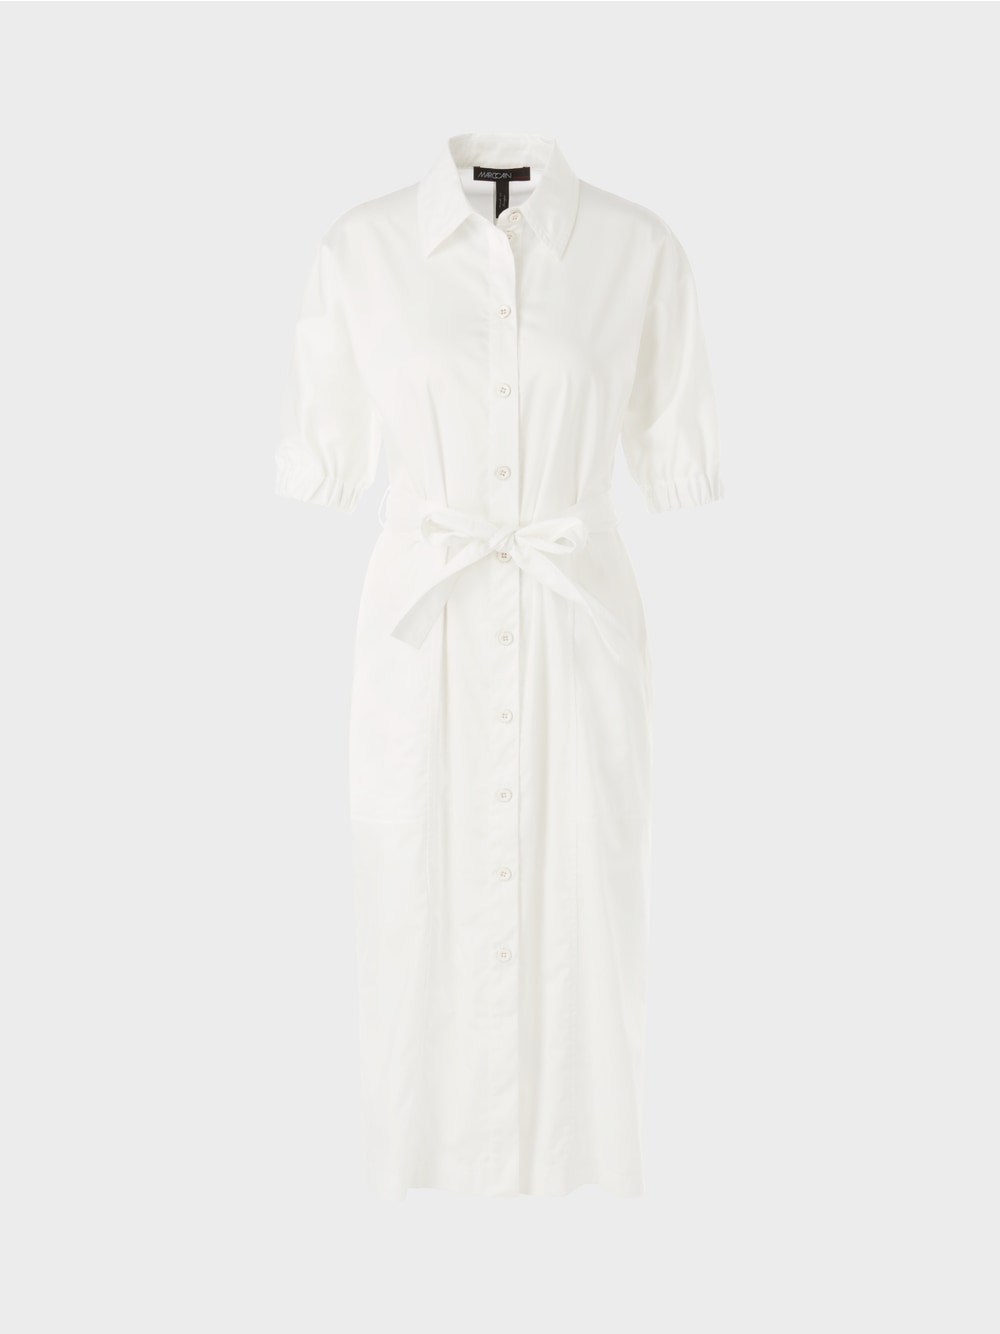 Marc Cain White Shirt dress with patch pockets